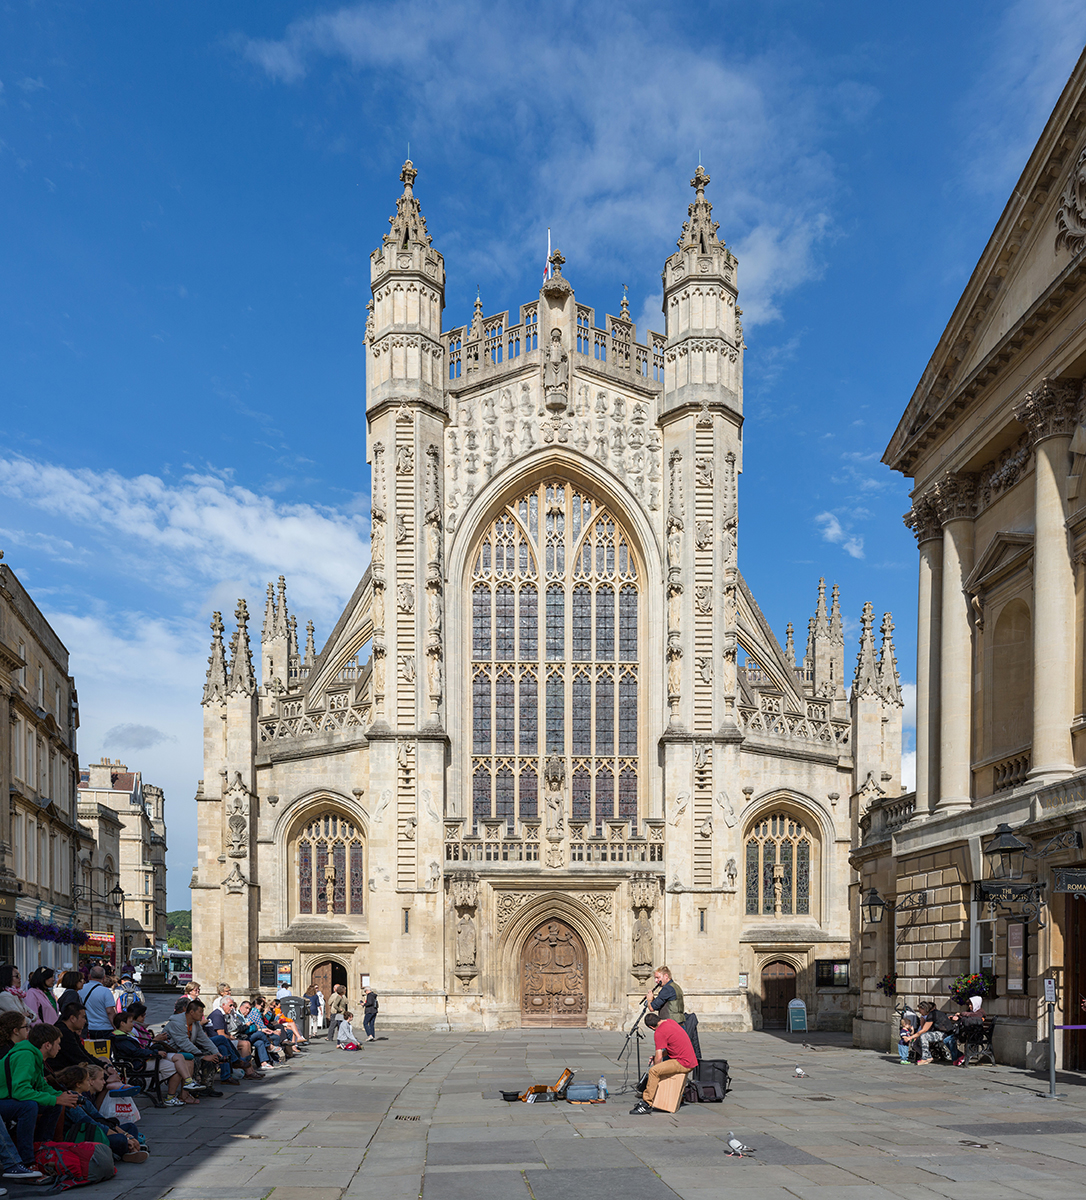 Georgian architecture, hot springs among gems in Bath